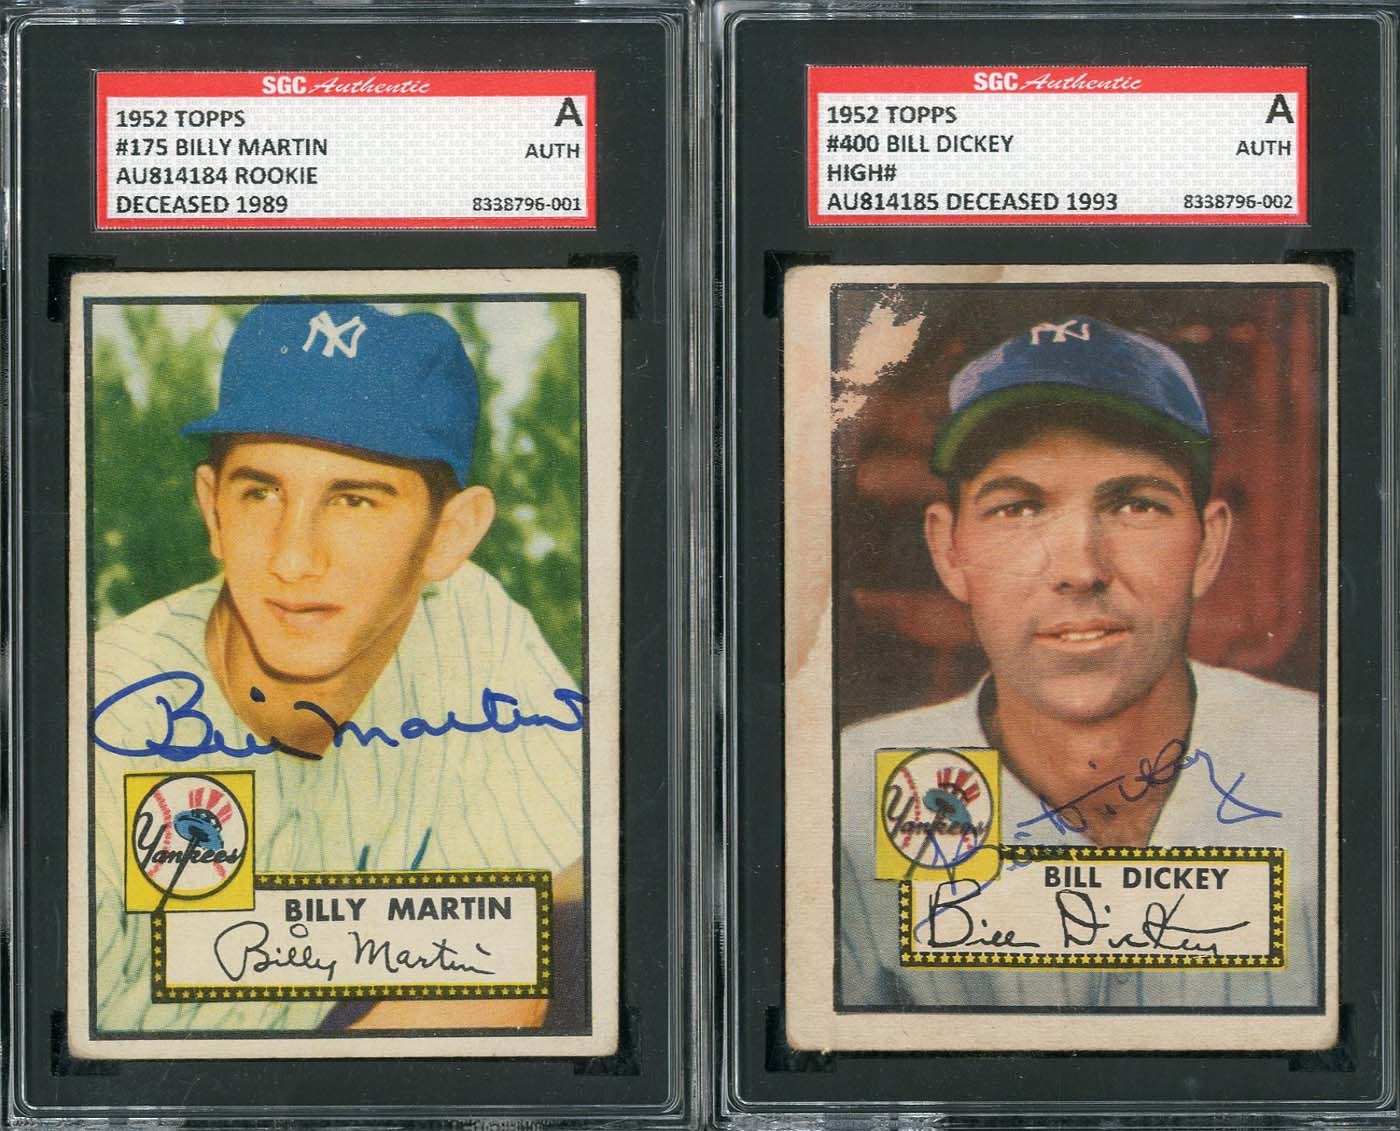 - 1952 Topps Collection of (67) Signed Cards with (8) HOFers including Dickey, Berra and Martin! - Two SGC Authenticated